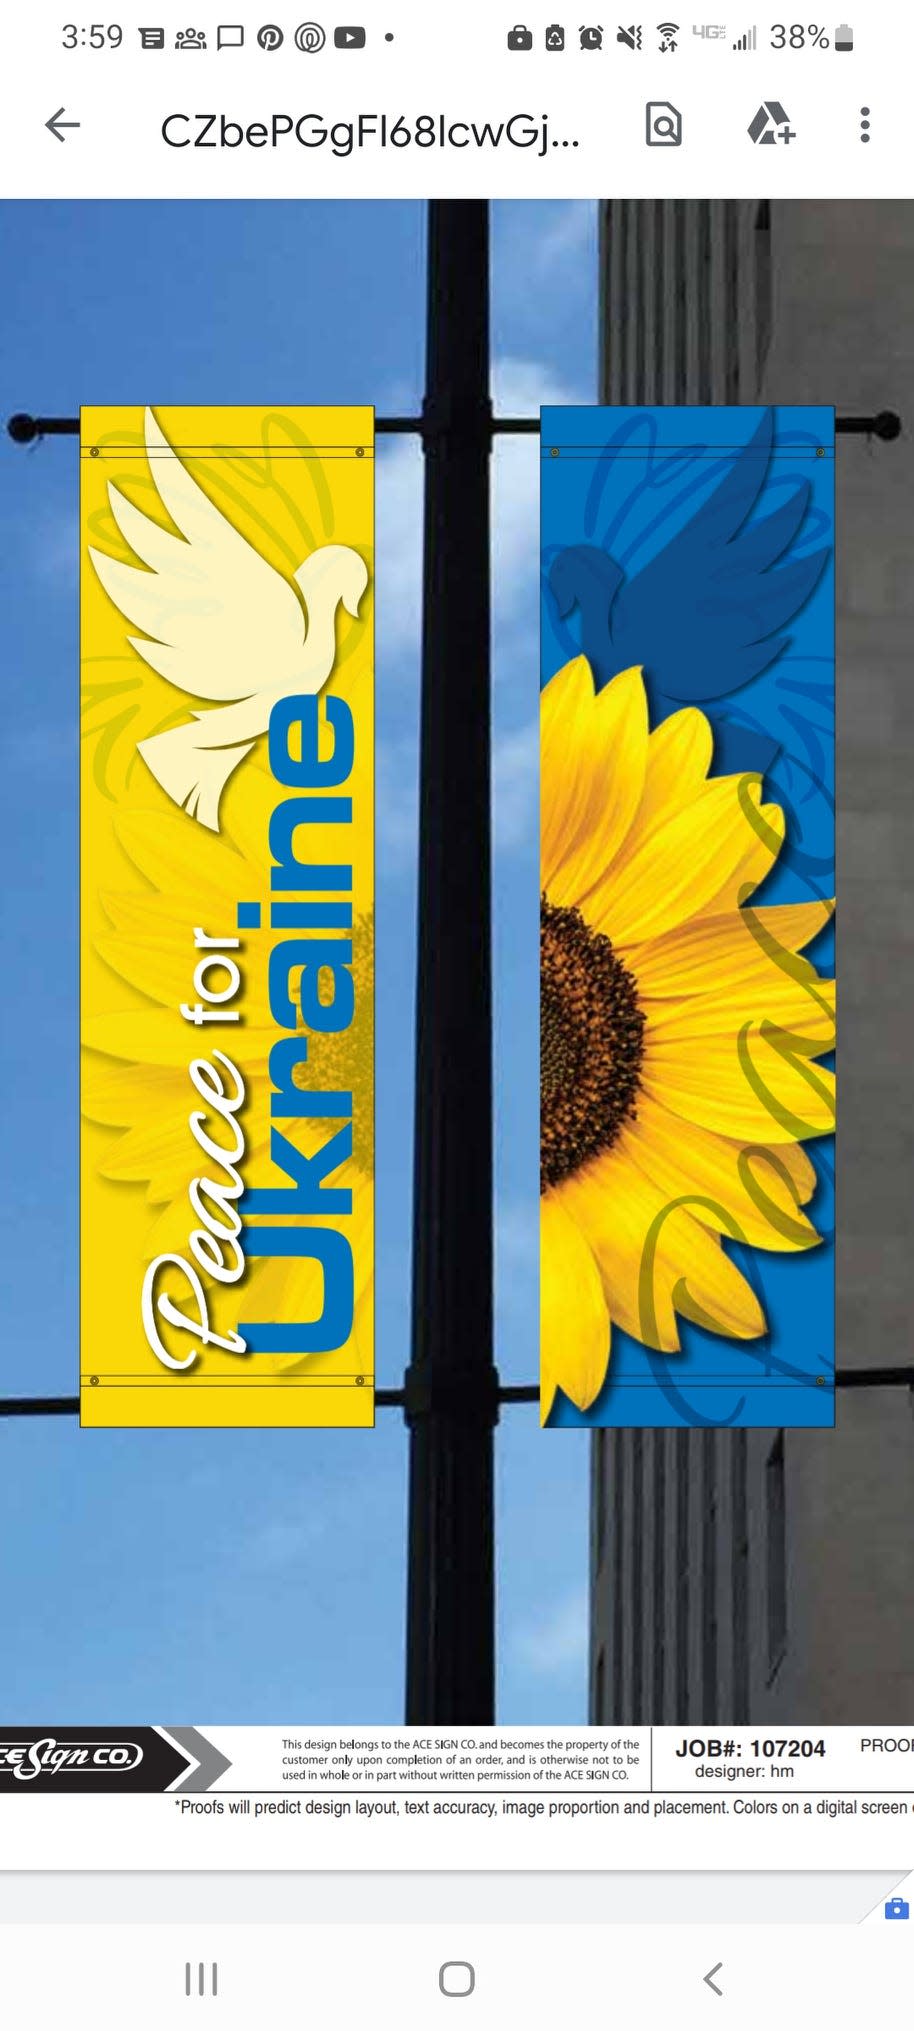 Peace for Ukraine banners which will go up around the downtown area early this week.